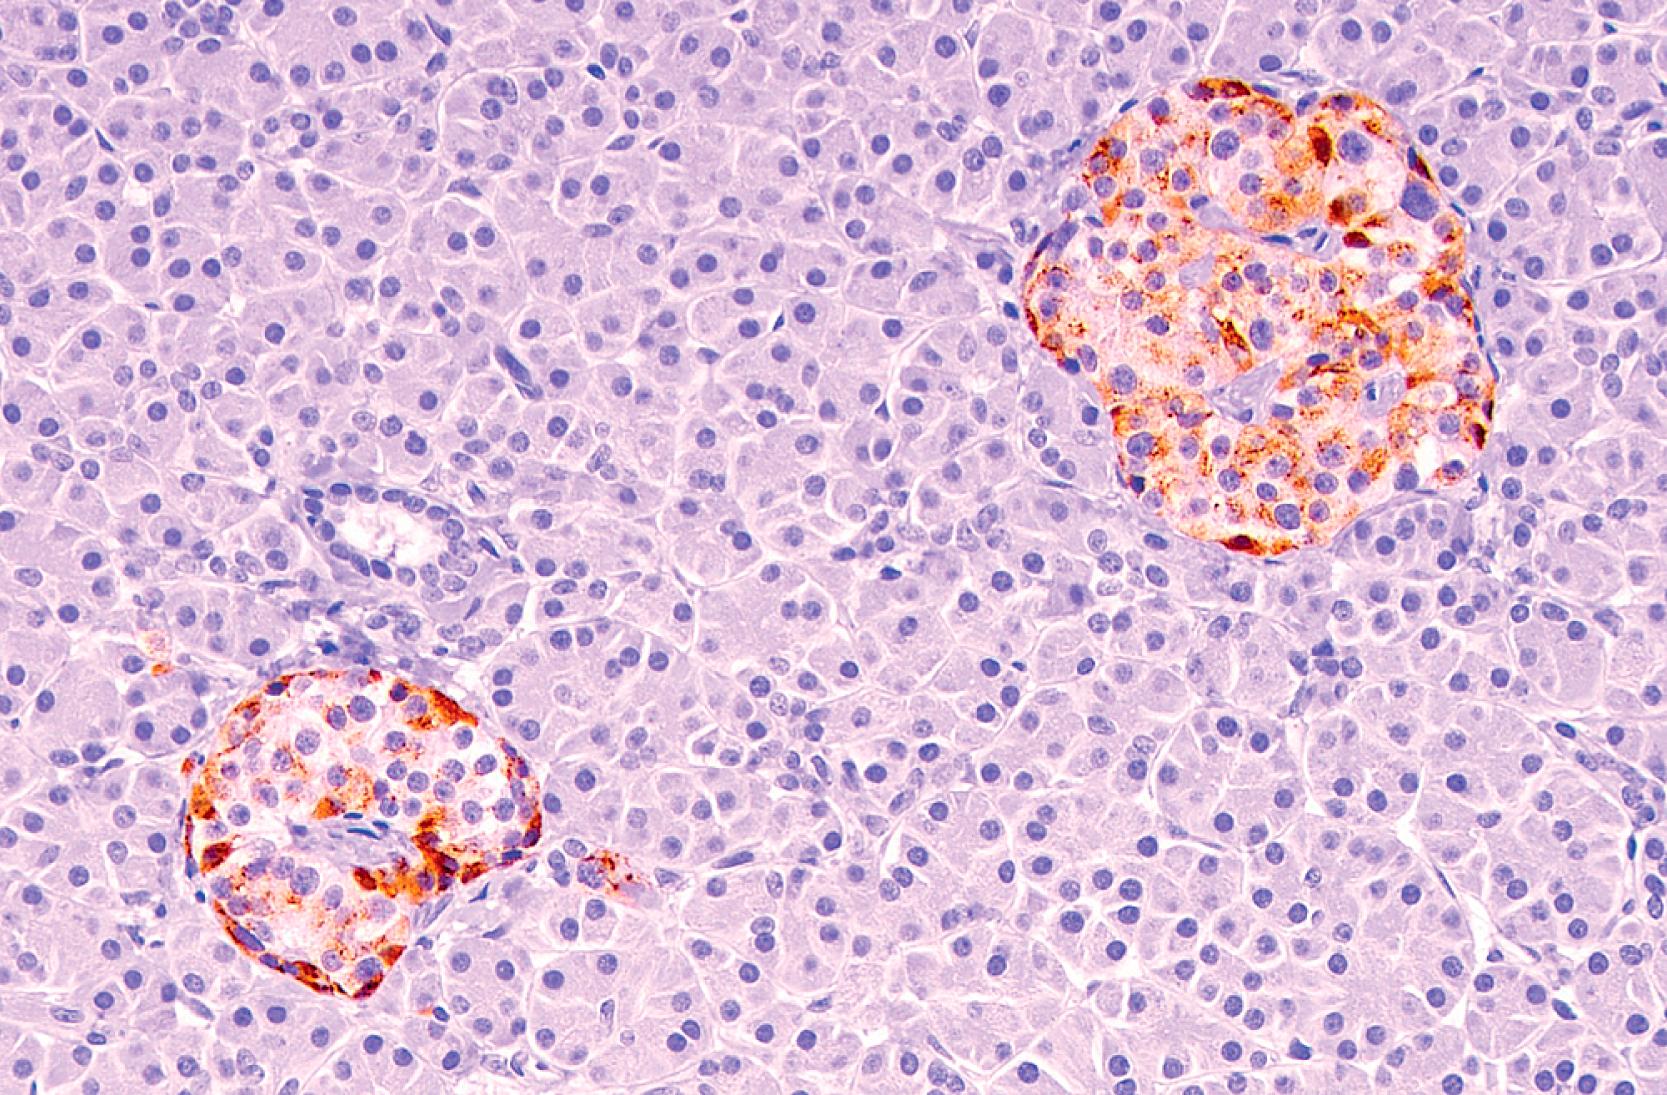 Fig. 15.2, Immunohistochemistry for chromogranin shows strong positive staining in islets of Langerhans, which is more prominent in the peripheral cells. Ducts and acini are negative.